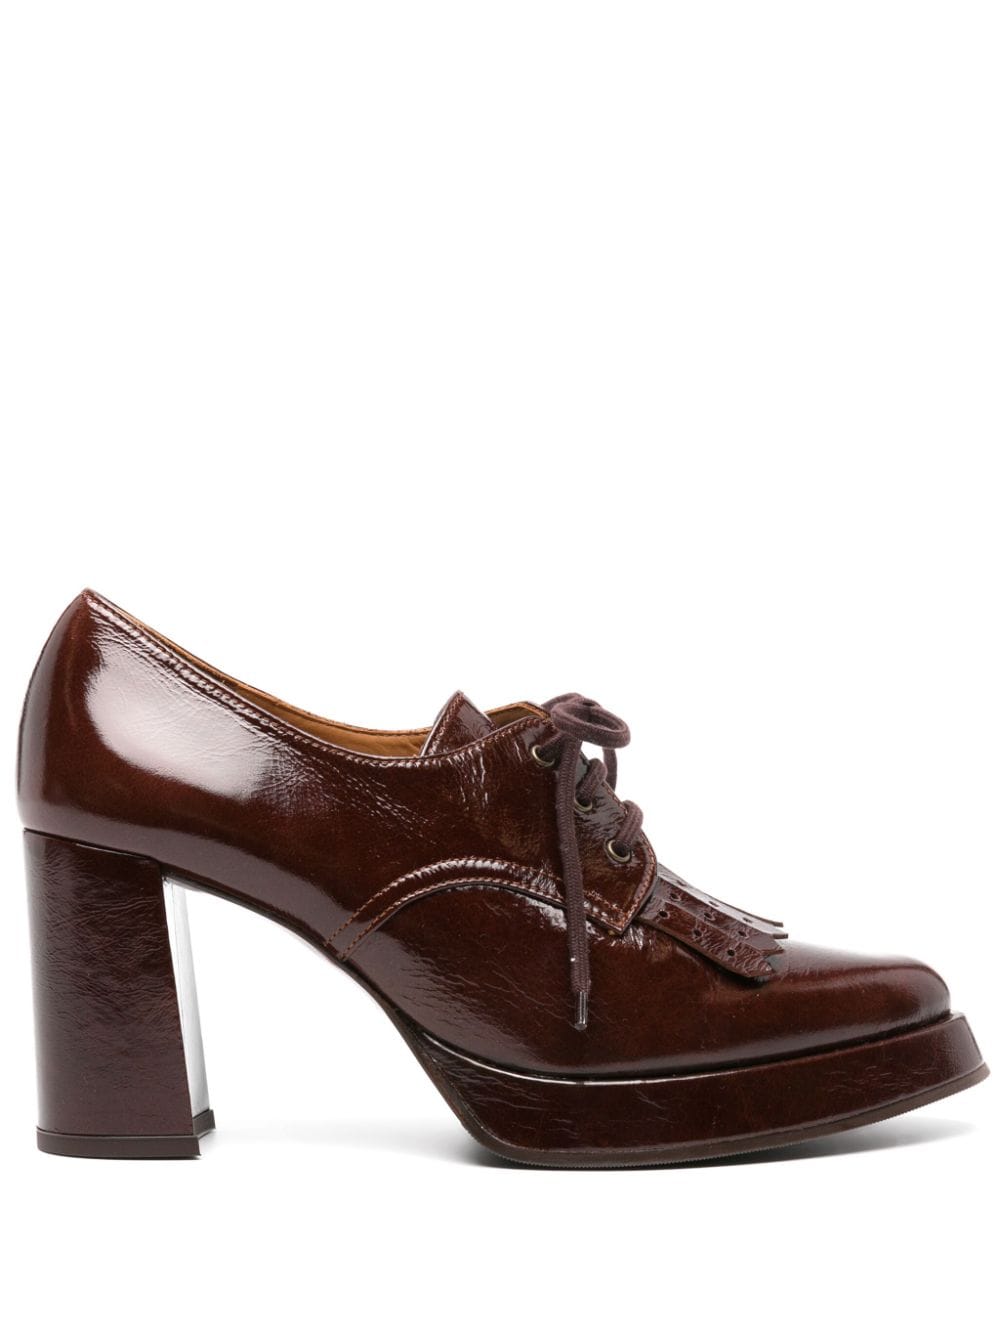 Chie Mihara 75mm Faiko leather loafer pumps - Brown von Chie Mihara